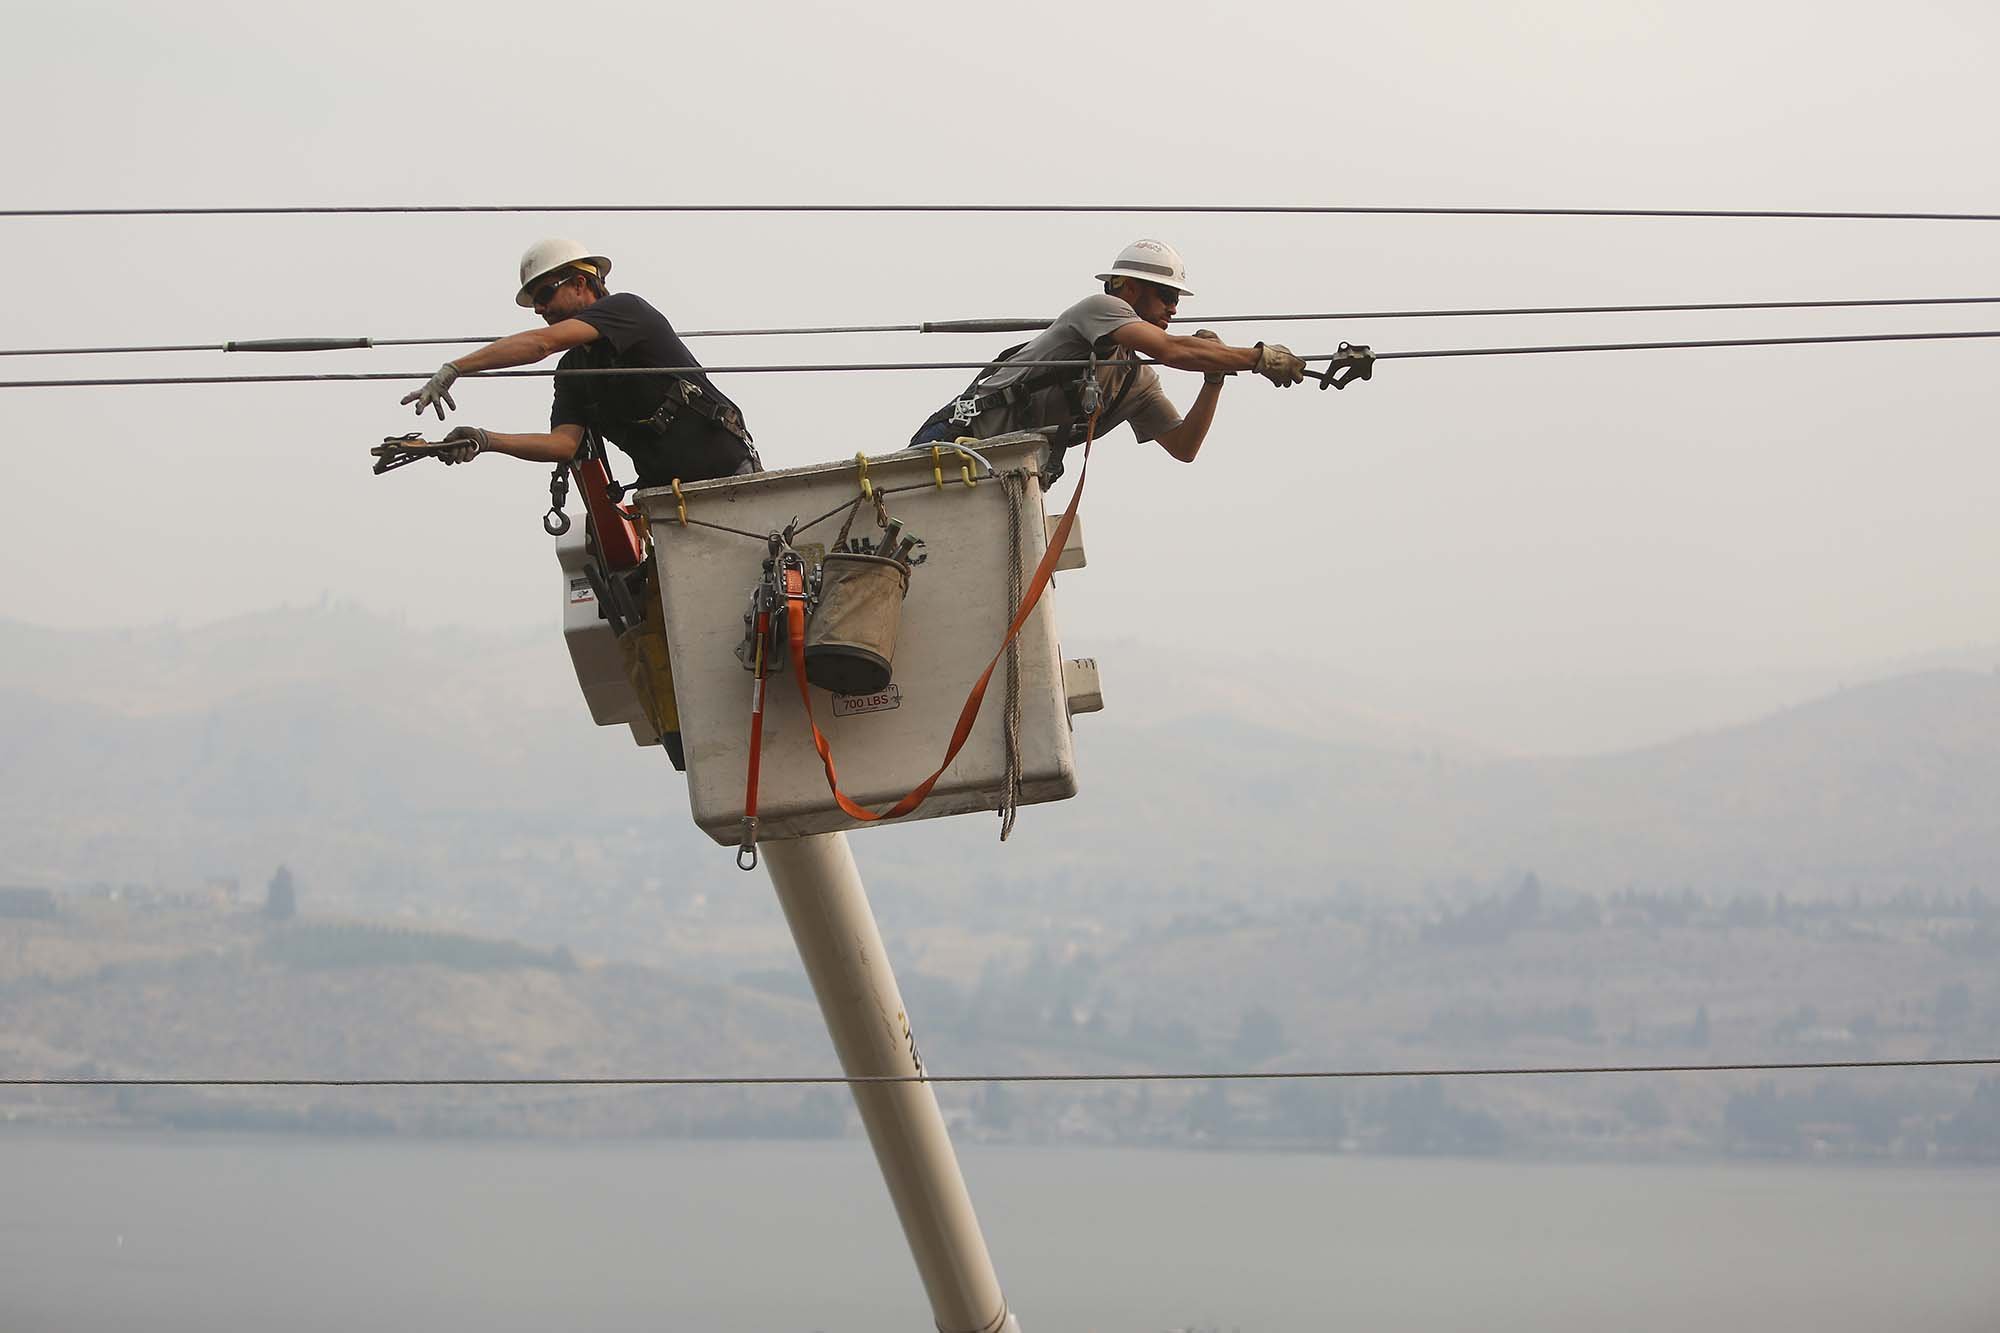  Chelan County PUD linesman Jared Montgomery, left, and Joel Macintosh, right, work on restoring power to the city of Chelan early on Sunday morning as smoke fills the lake, Aug. 16, 2015. Some 9,000 homes were without power last night, and linesman 